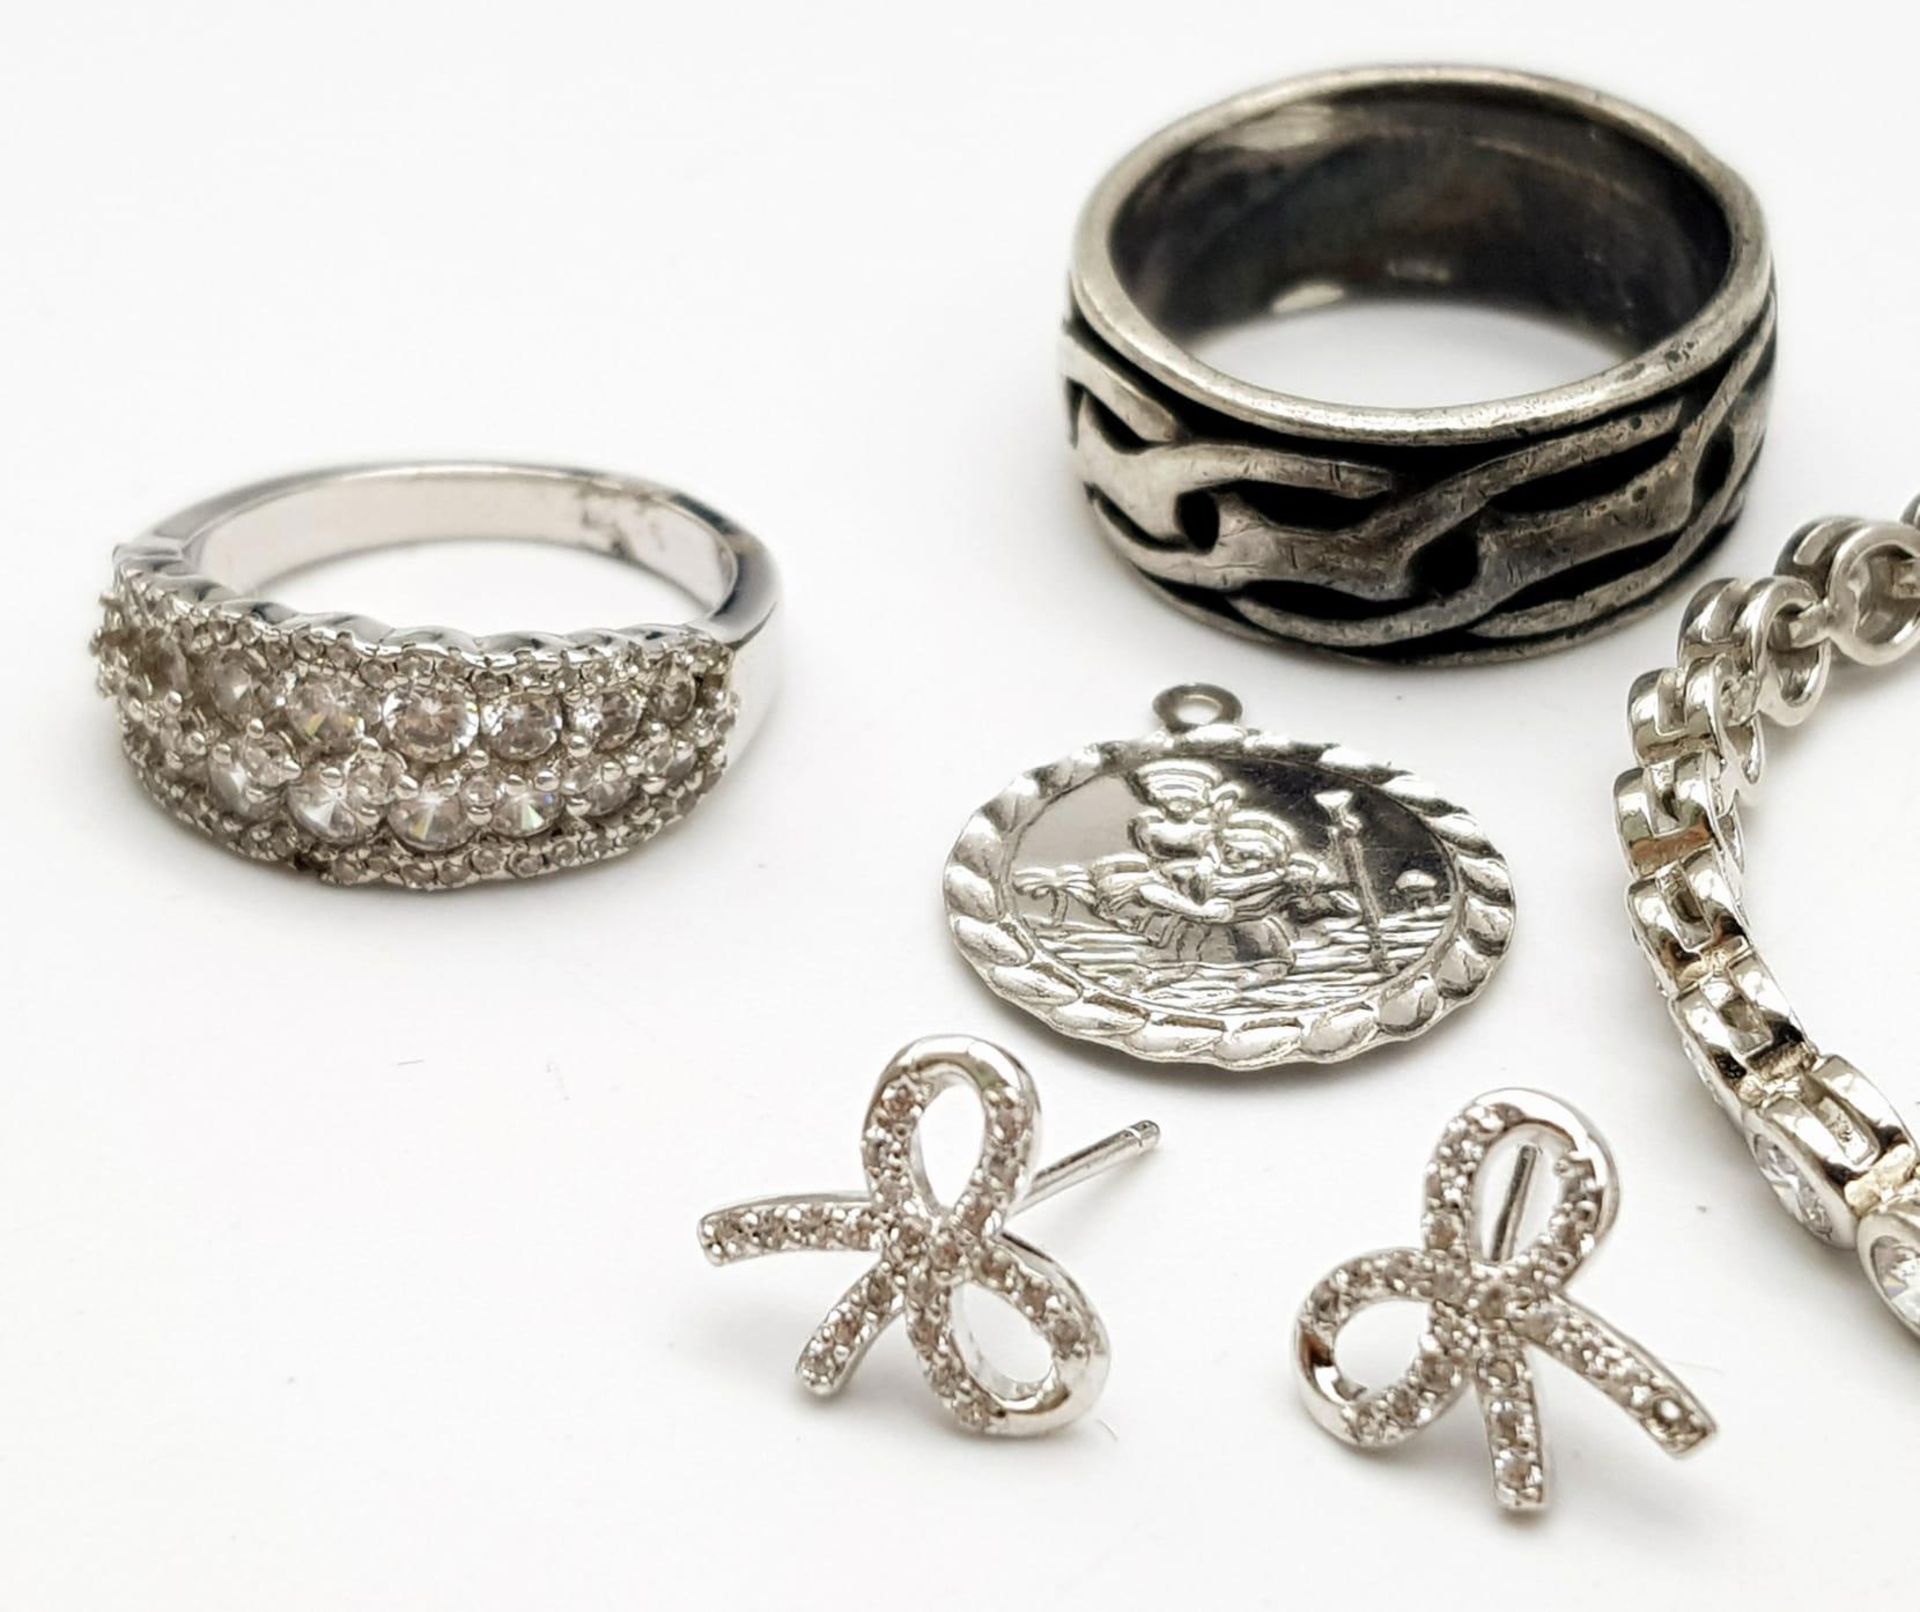 SELECTION OF 10 SILVER ITEMS 2 PAIRS OF EARRINGS, 2 PENDANTS, 4 RINGS, 1 BRACELET AND 1 NECKLACE - Image 4 of 6